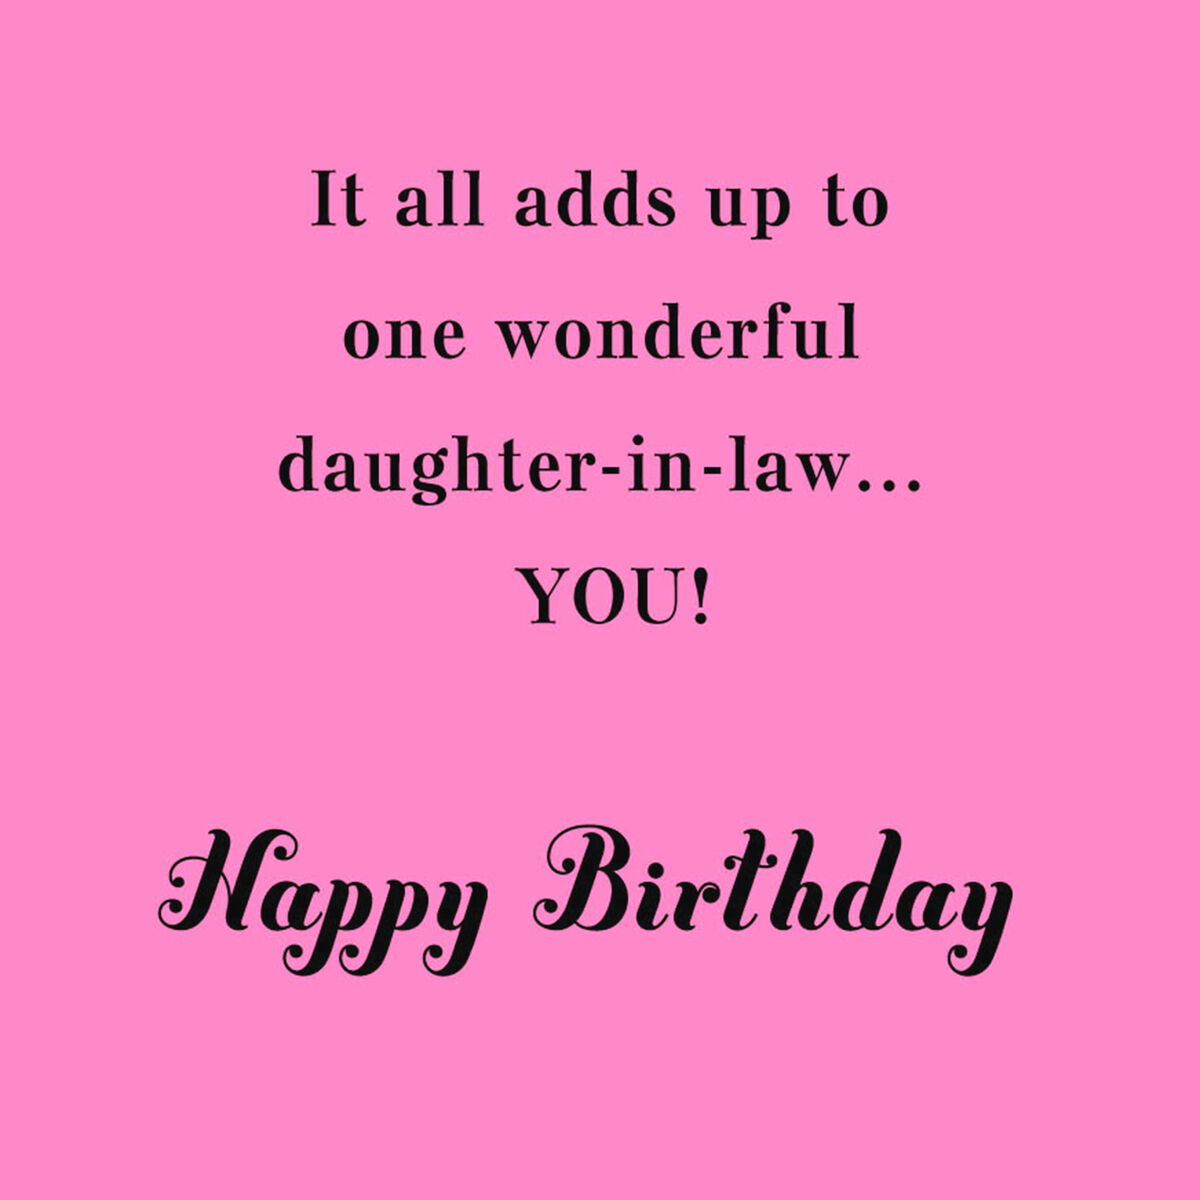 You're Wonderful Birthday Card for Daughter-in-Law - Greeting Cards ...